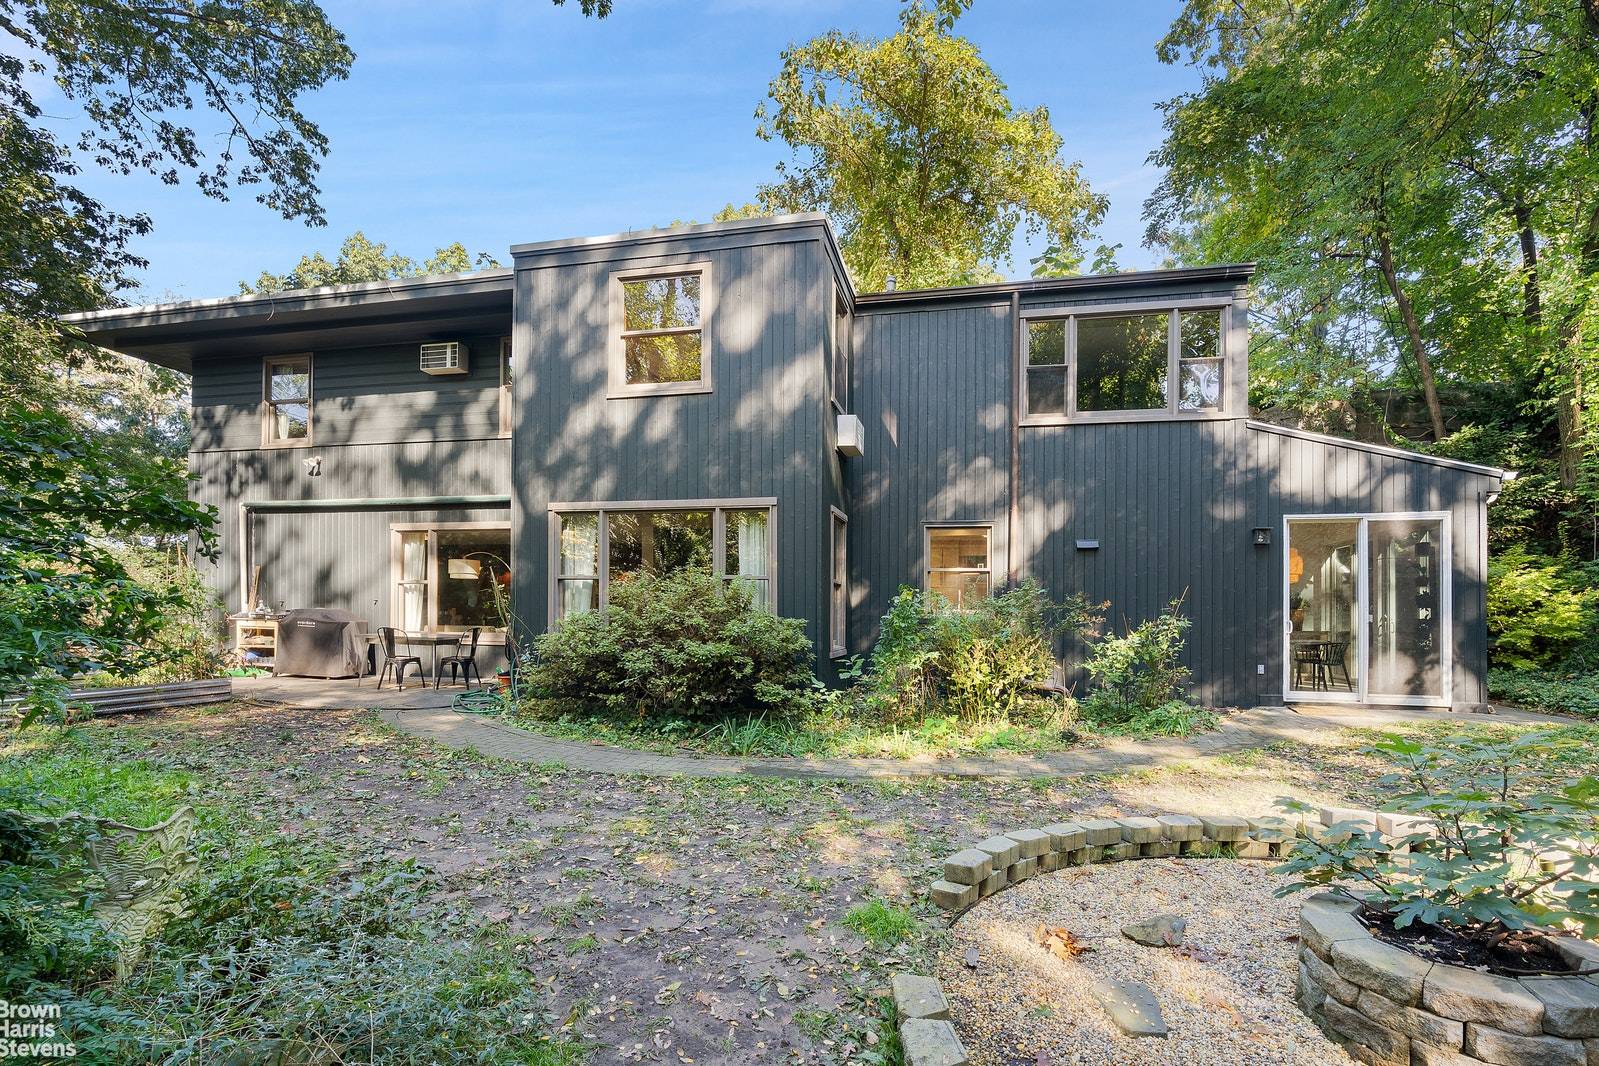 5998 Palisade Avenue is a four bedroom, two and a half bath house nestled beautifully into the distinctive hills of North Riverdale, cloistered by 40ft rock formations.